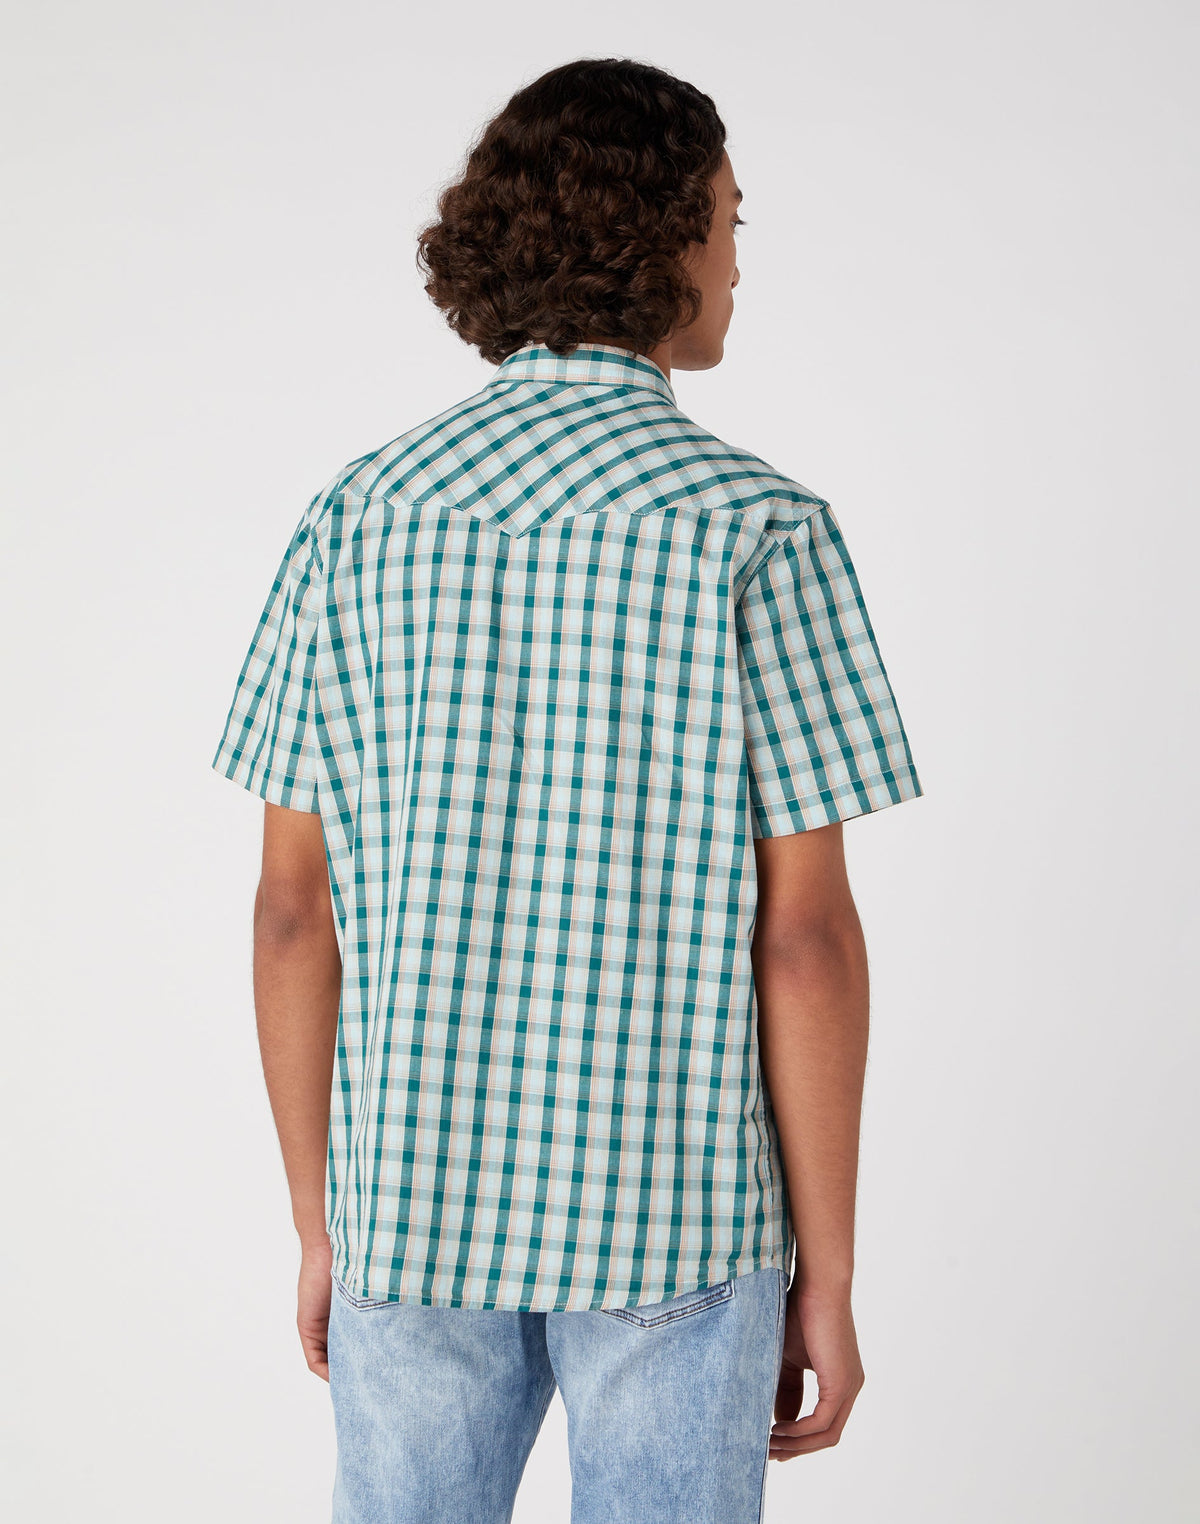 Short Sleeve Western Shirt in Bayberry Green